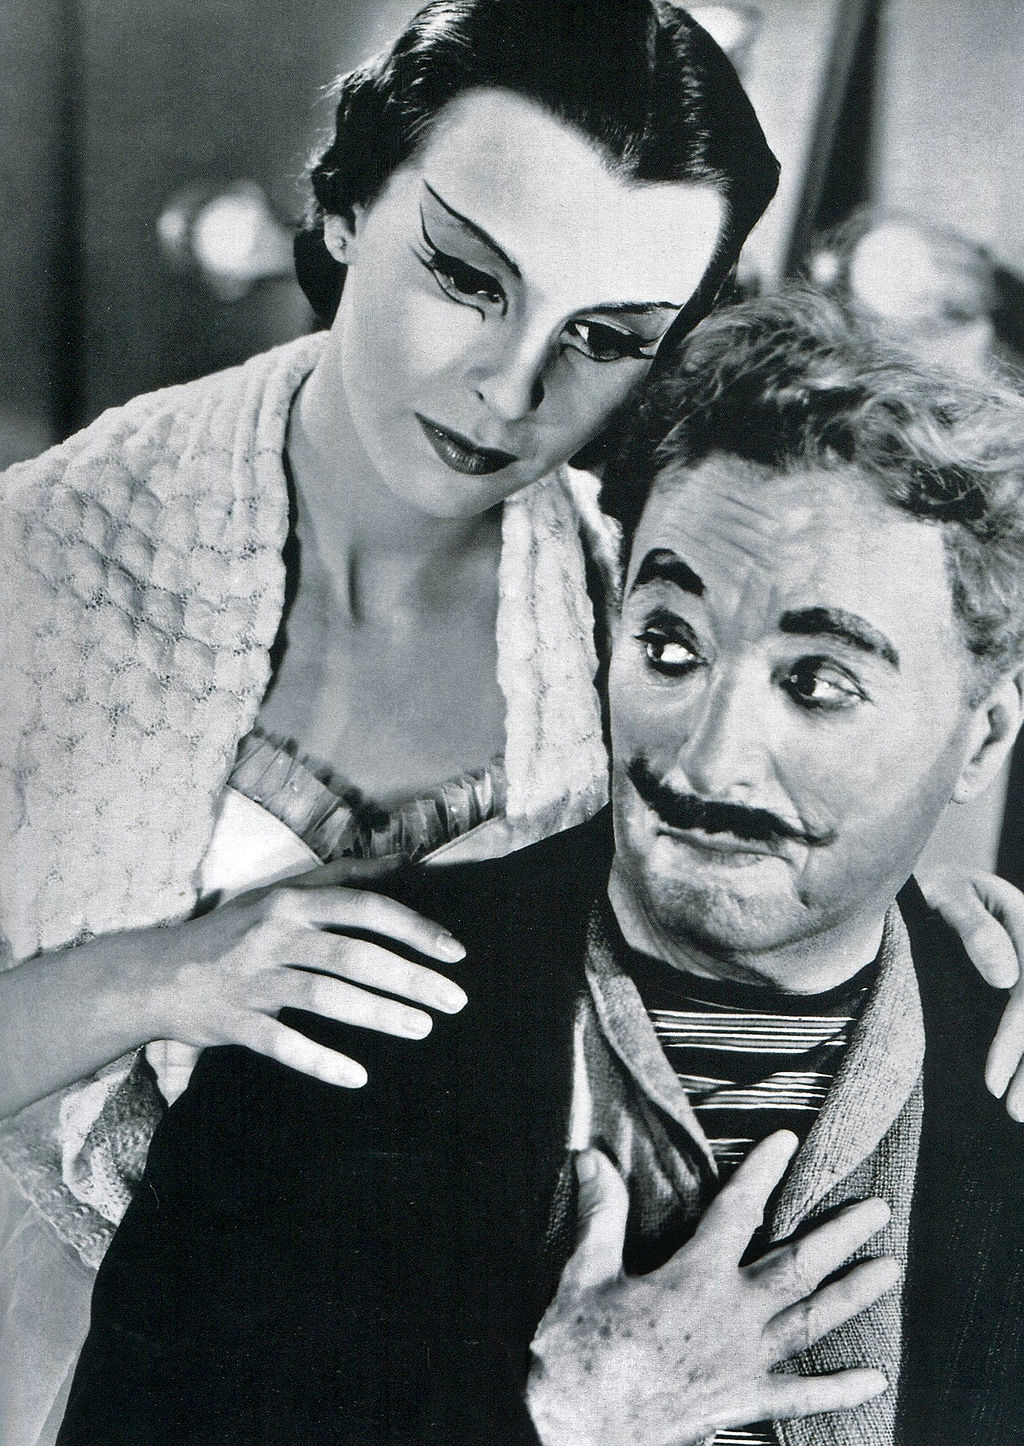 Claire Bloom and Charlie Chaplin in Limelight